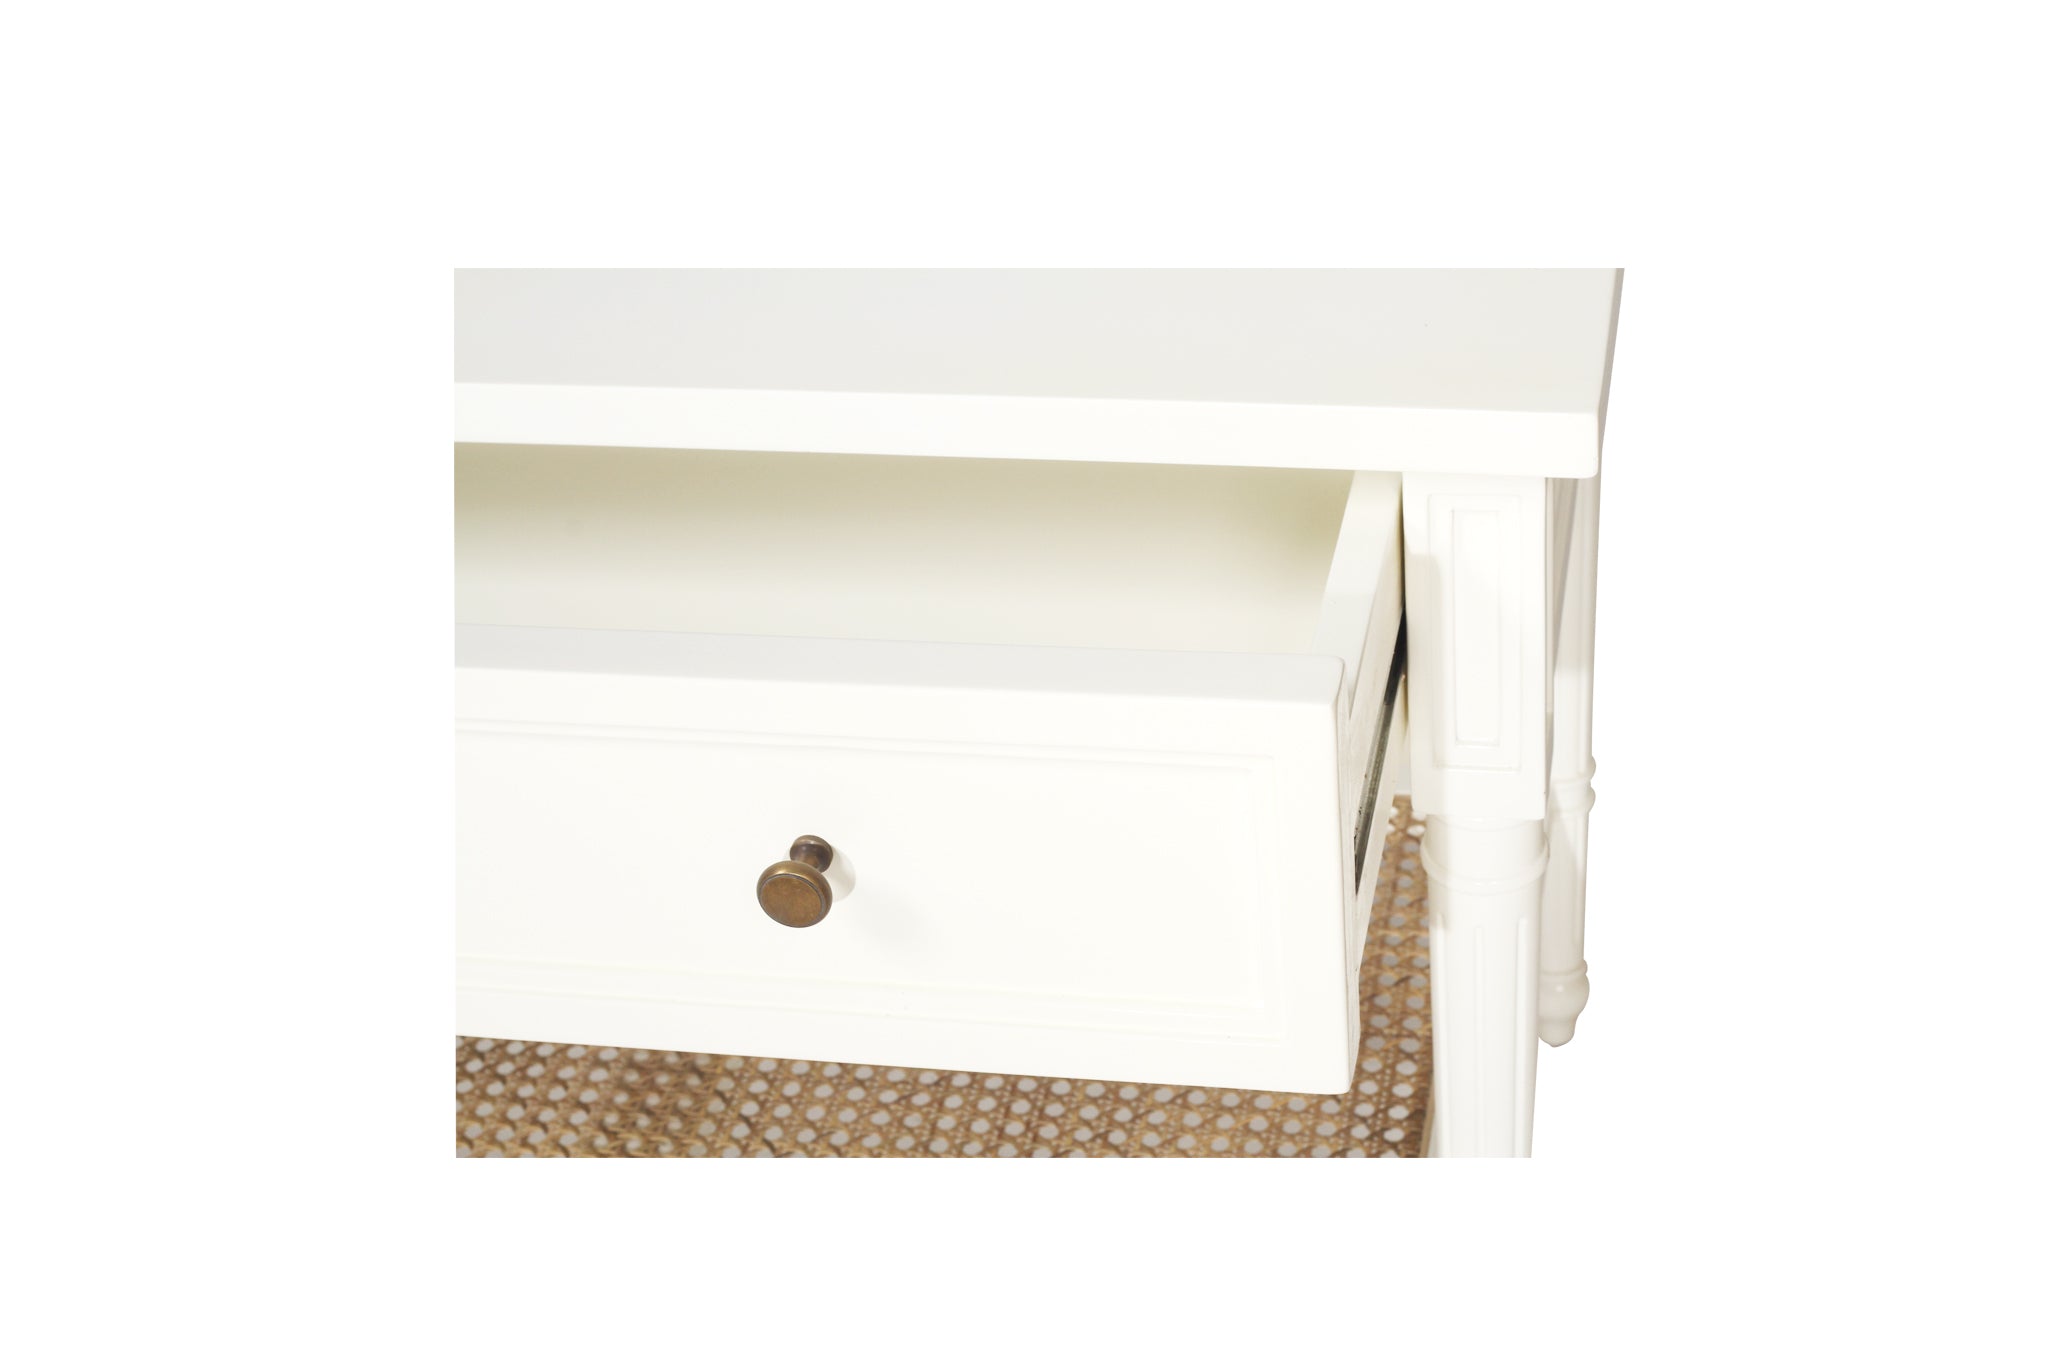 Vaucluse Mahogany & Cane Nightstand / Bedside Table – White